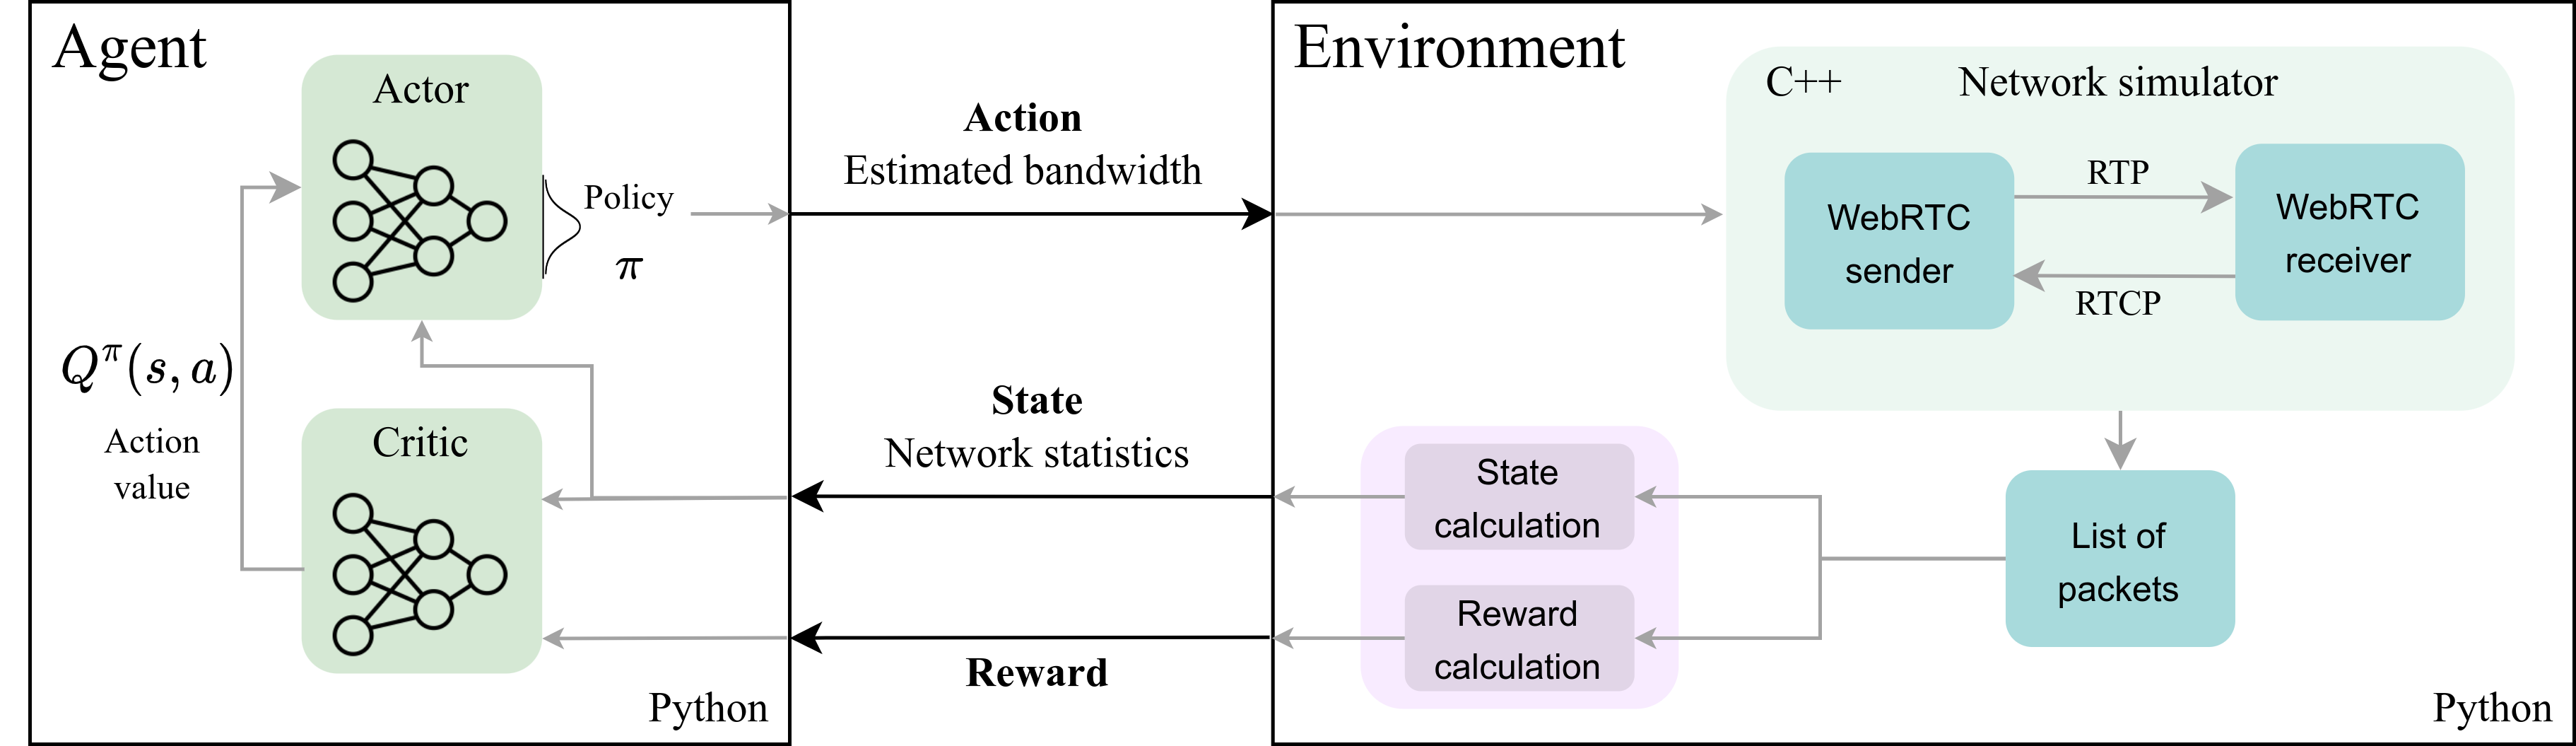 Schema of the system